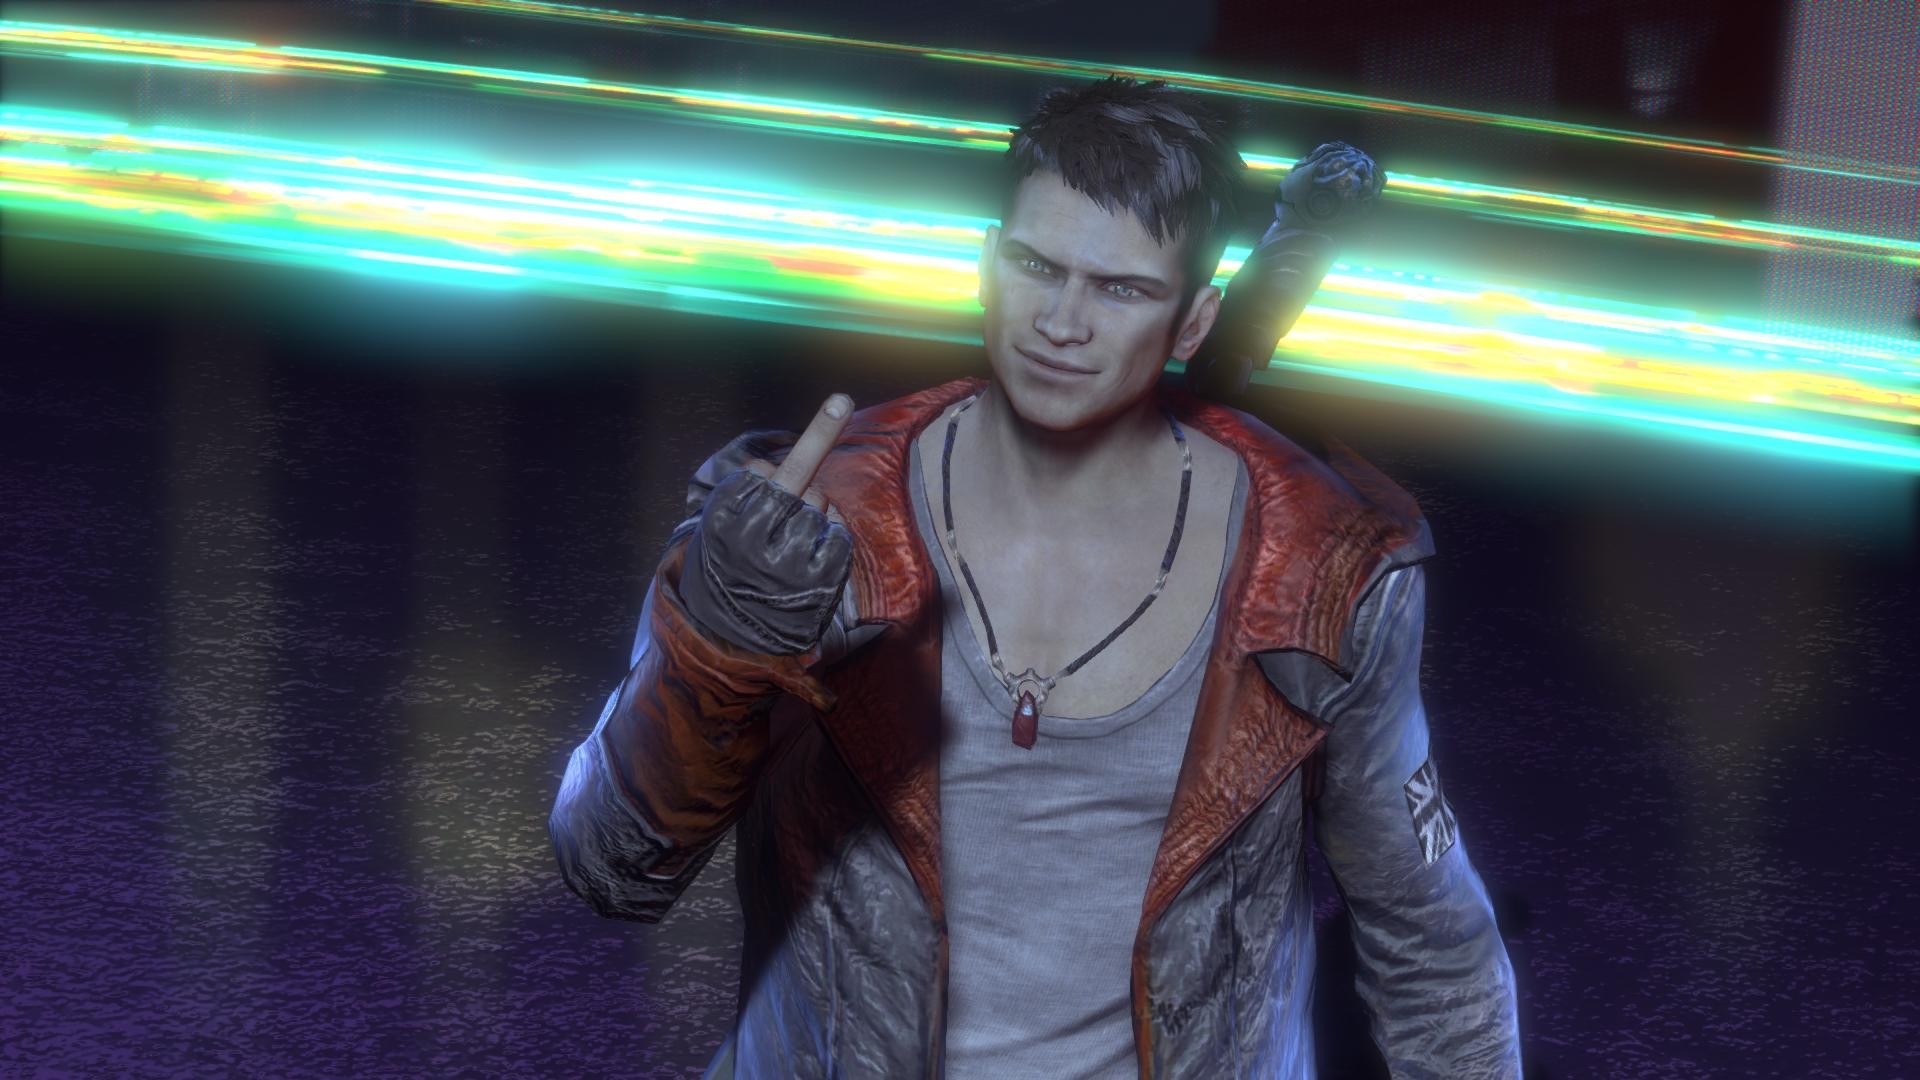 General 1920x1080 DmC: Devil May Cry Dante (Devil May Cry) video games obscene hand gesture middle finger video game men